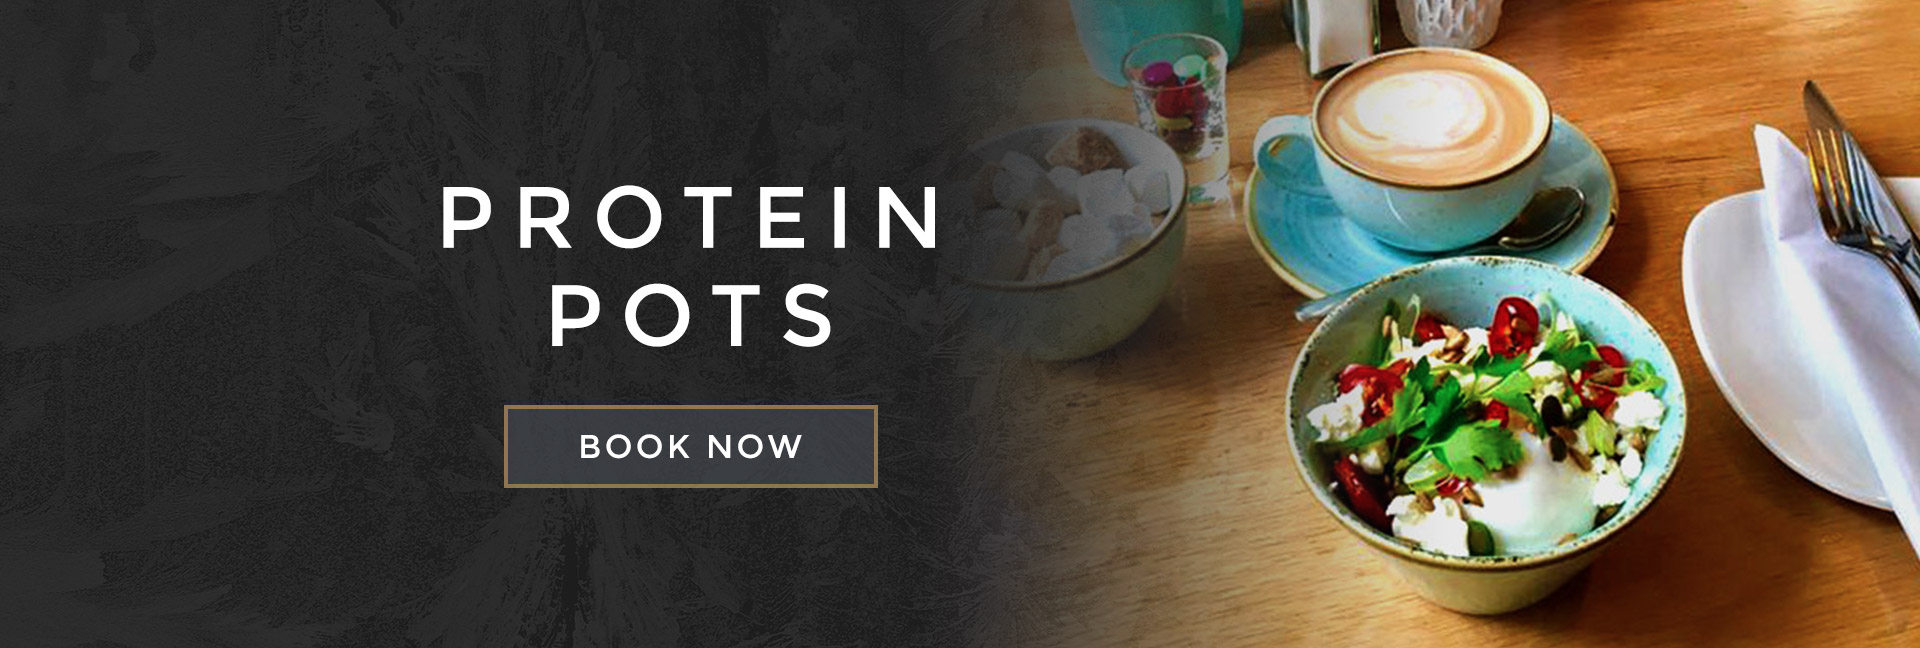 Protein pots at All Bar One Waterloo - Book your table